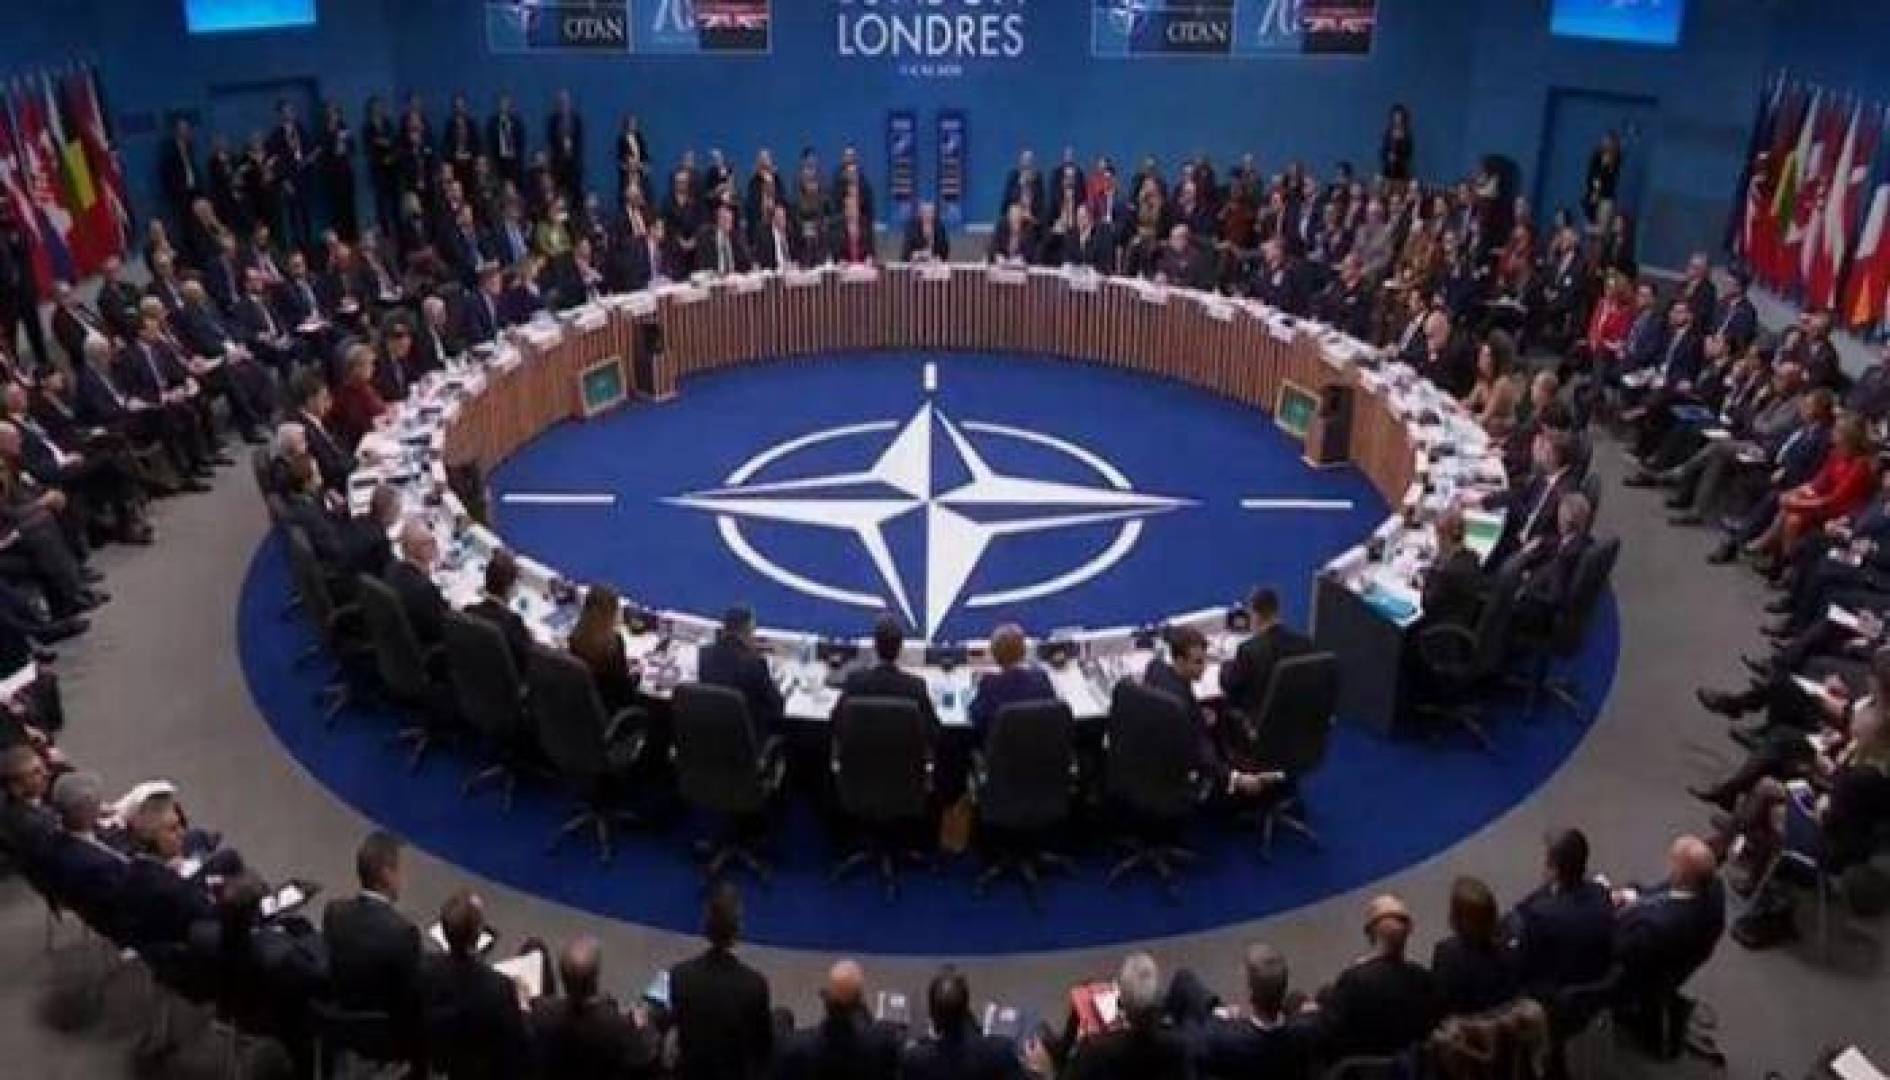 The US has invited the foreign ministers of Israel and Arab countries to the NATO summit